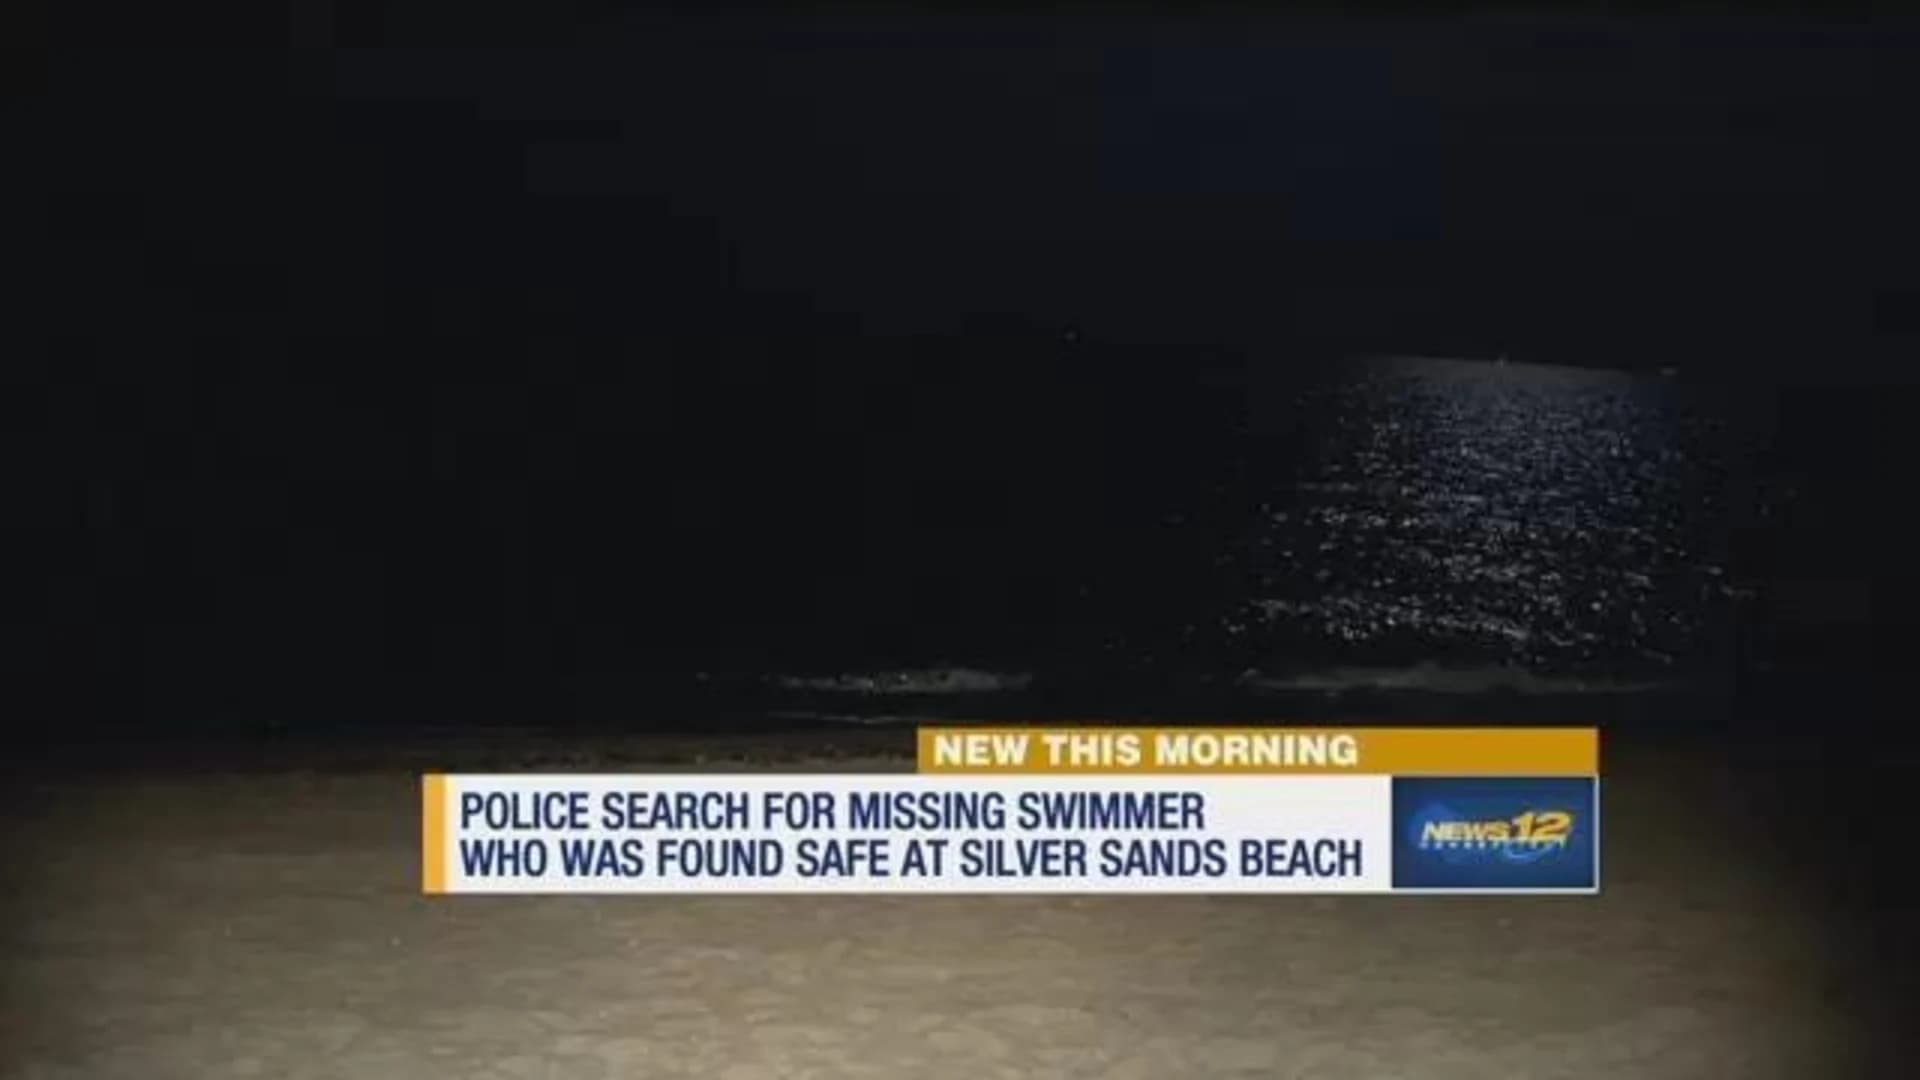 Swimmer found safe at Silver Sands Beach after police search